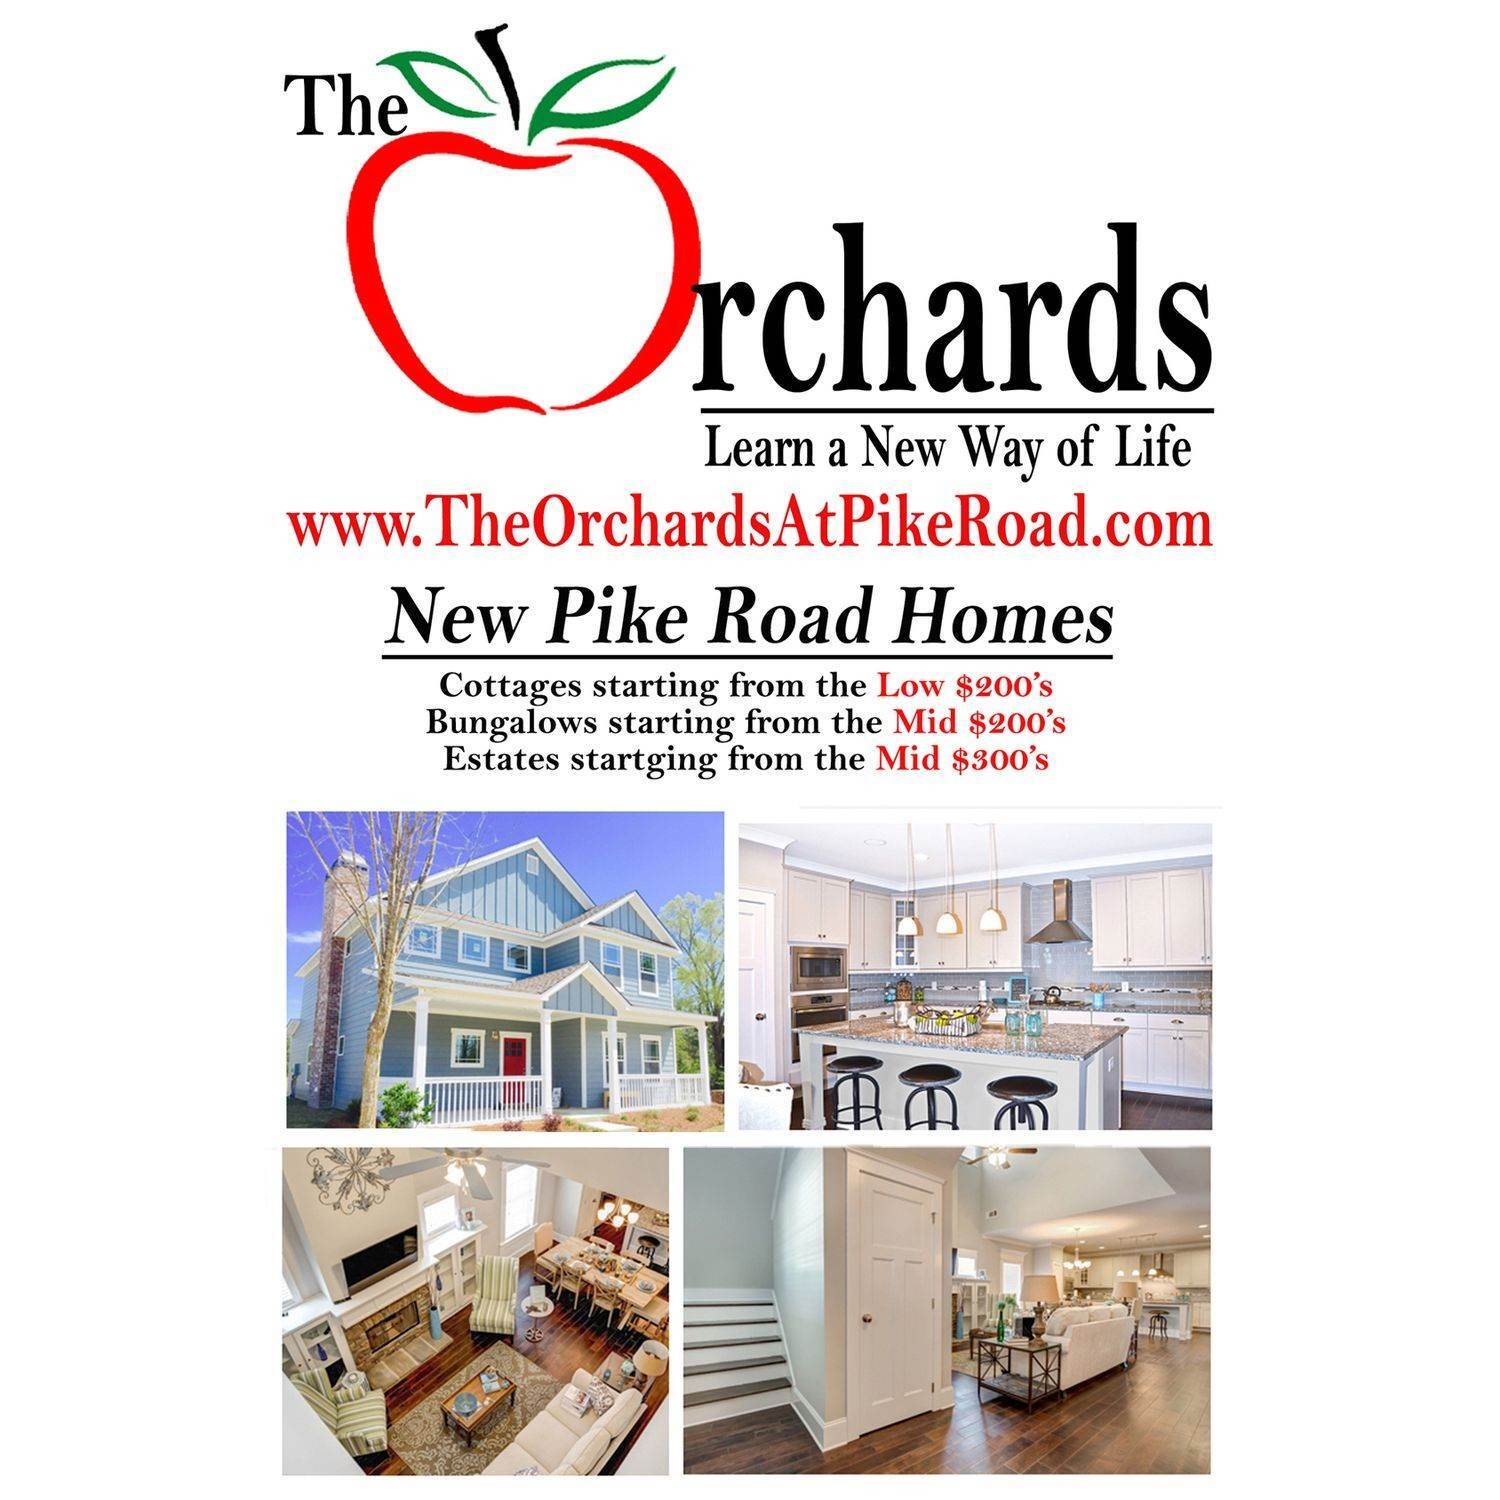 The Orchards at Pike Road building at 130 Avenue Of Learning, Pike Road, AL 36064